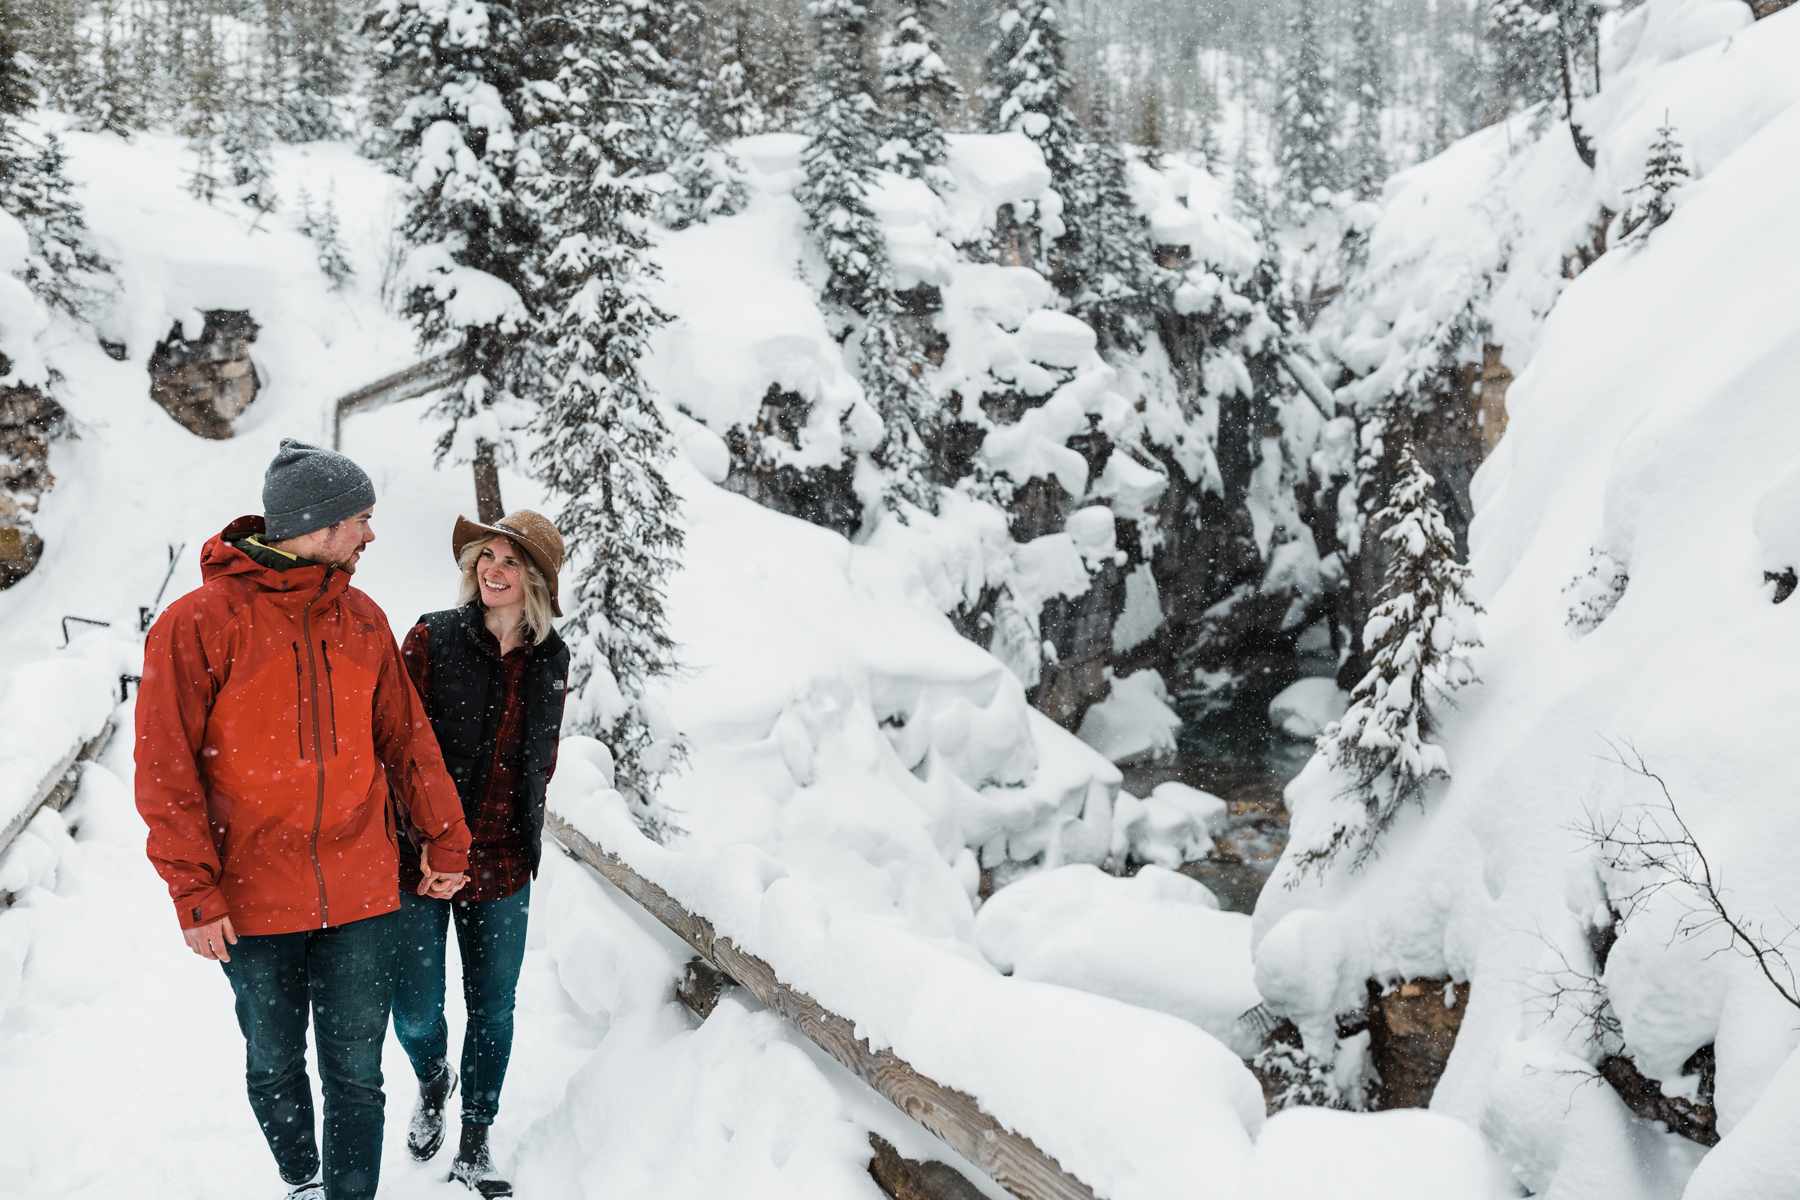 Kootenay National Park Engagement Photography Adventure Session in British Columbia and Alberta - Image 2